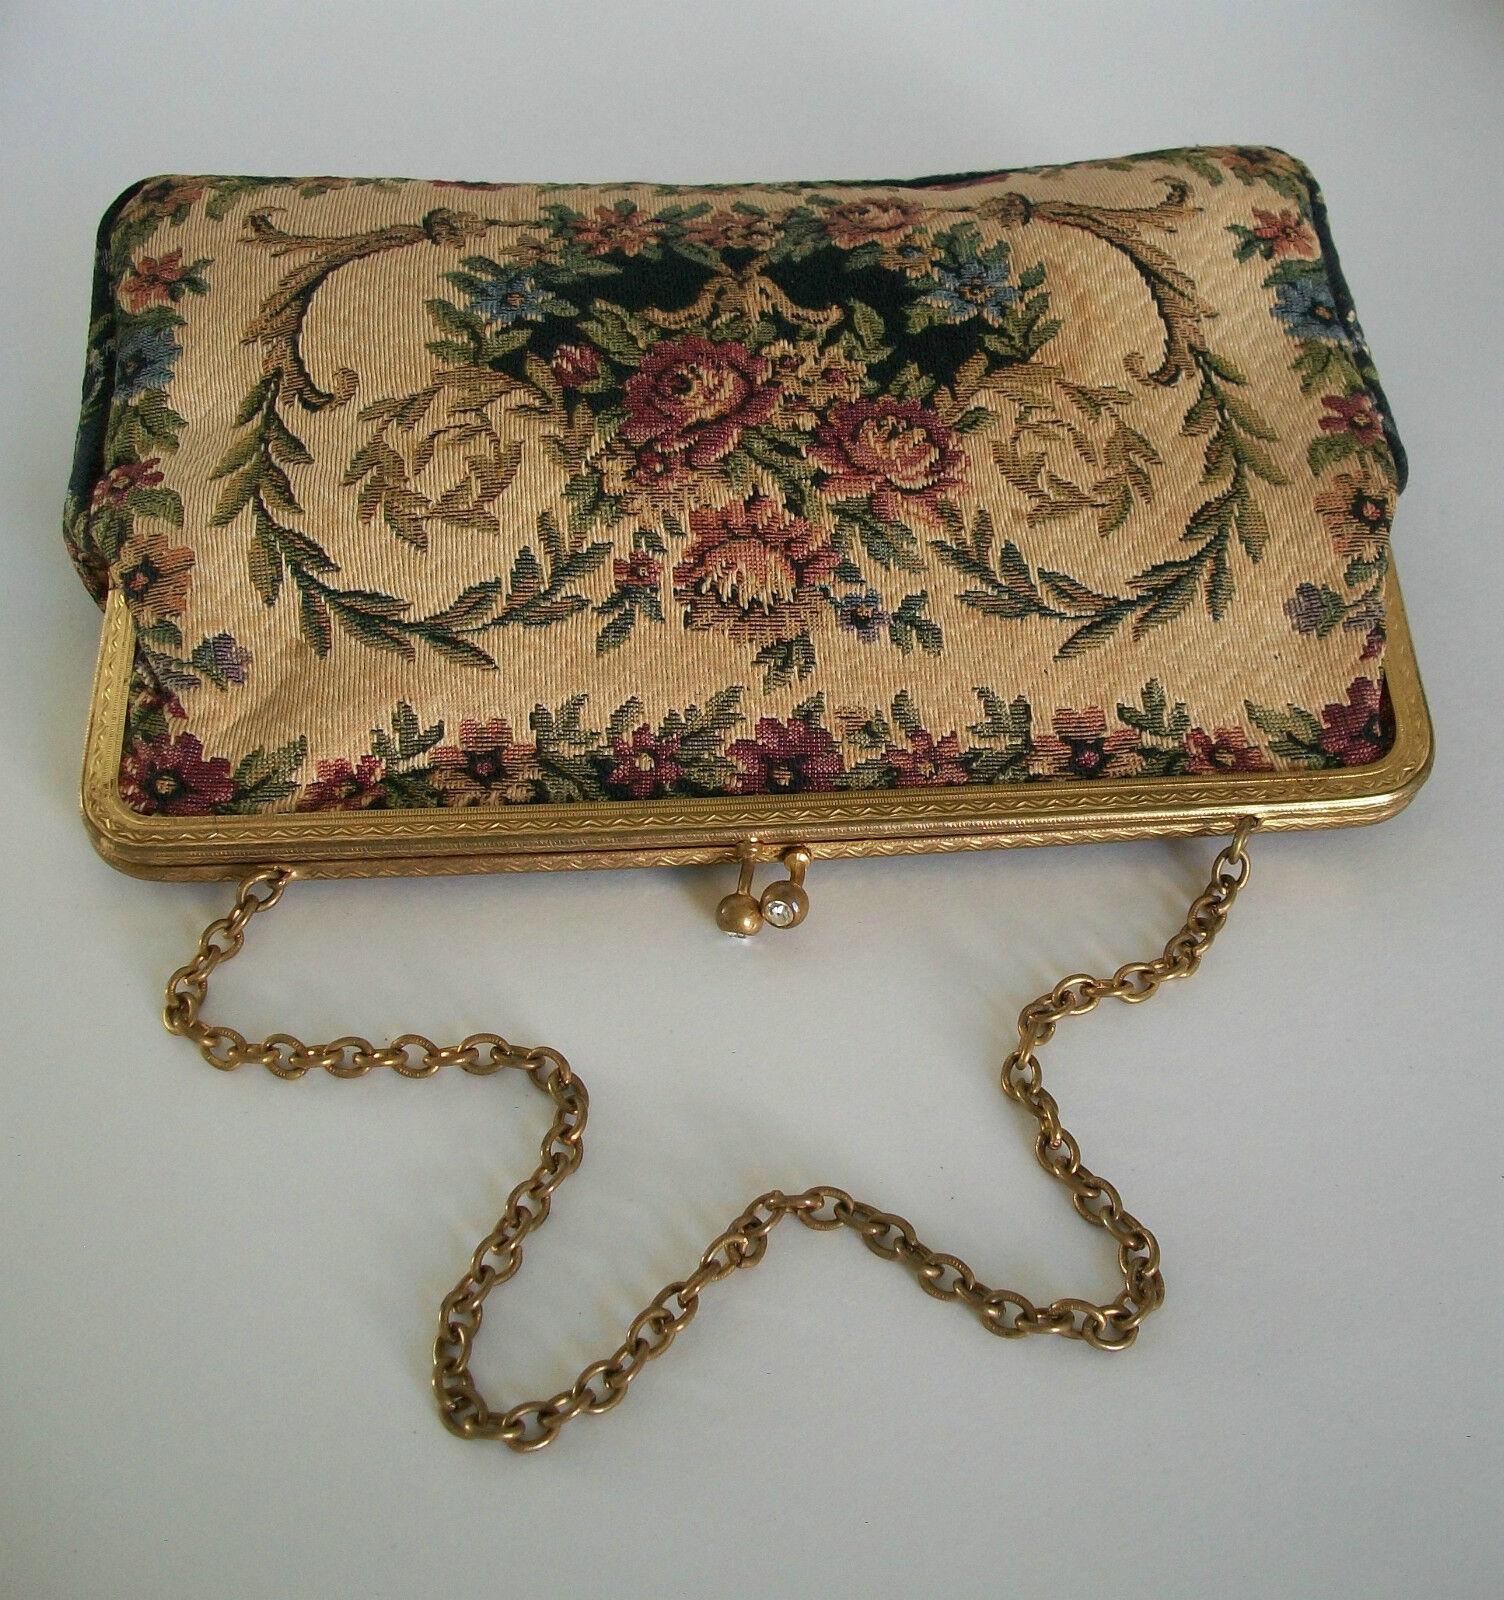 Vintage floral tapestry evening bag - small size  - fine detail to the machine made tapestry - rhinestone closure with gilt metal frame and chain link strap - original lining - unsigned - country of origin unknown - circa 1950's.

Good vintage